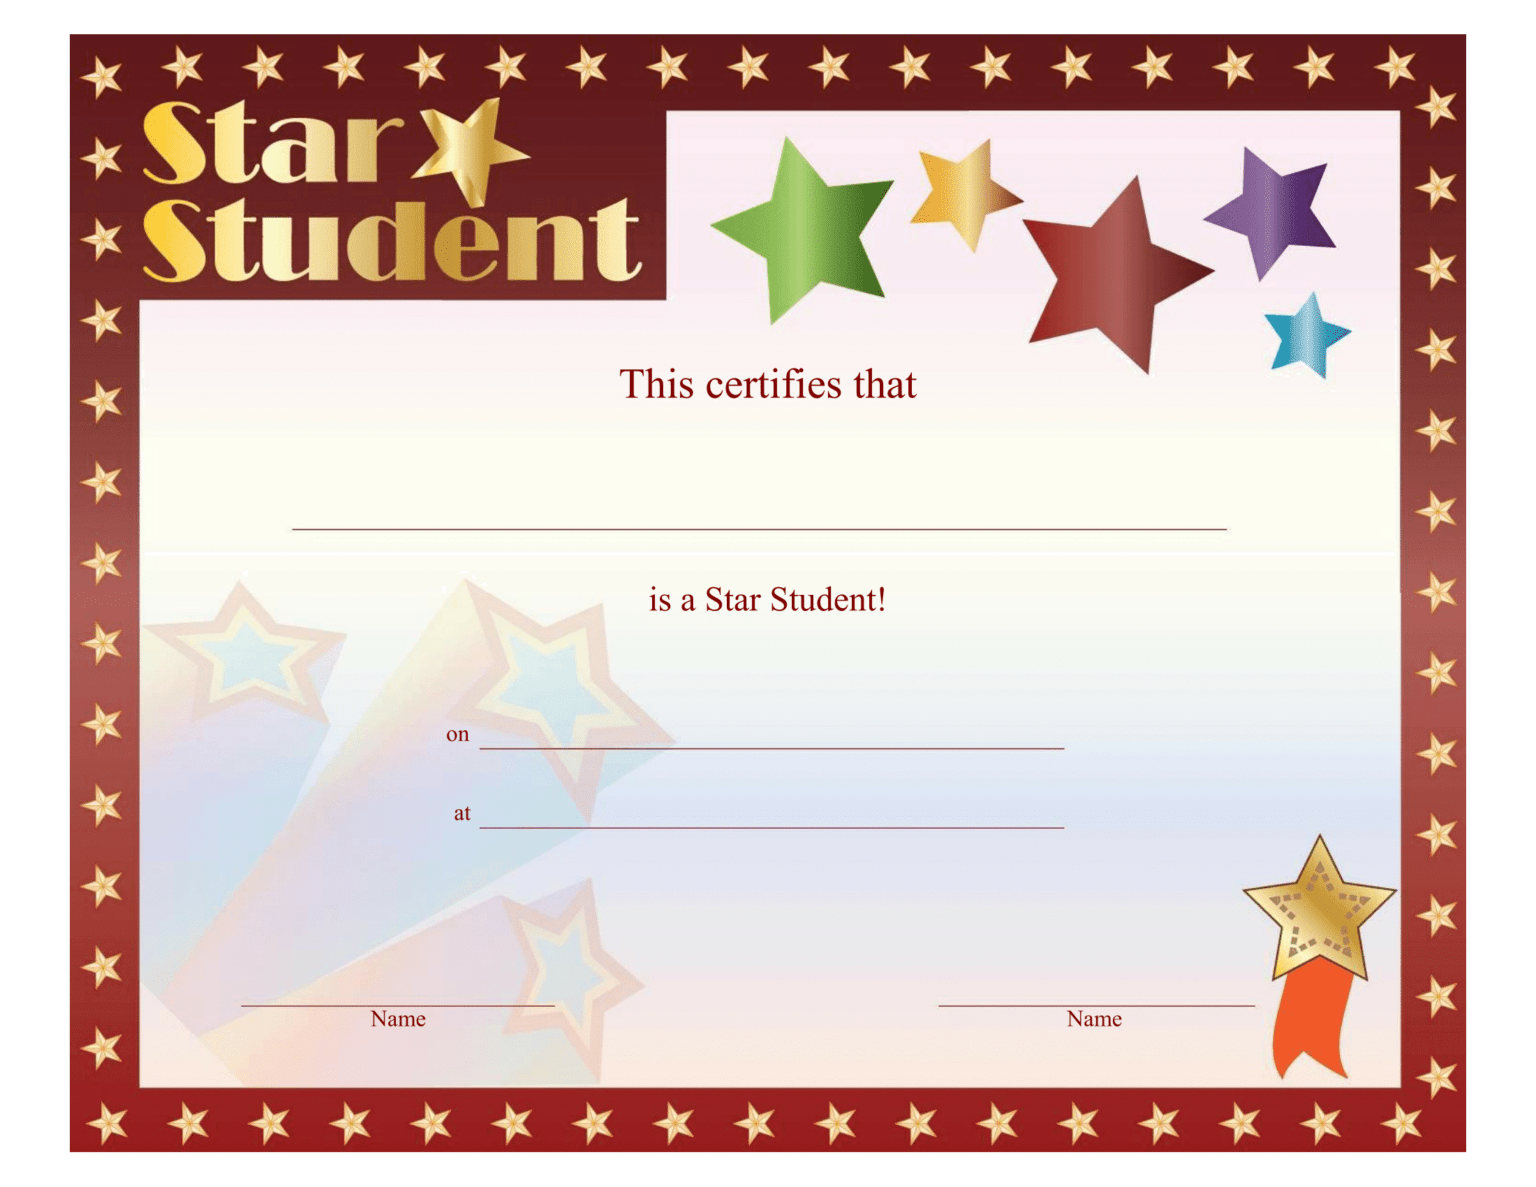 star-student-certificate-free-printable-download-for-star-certificate